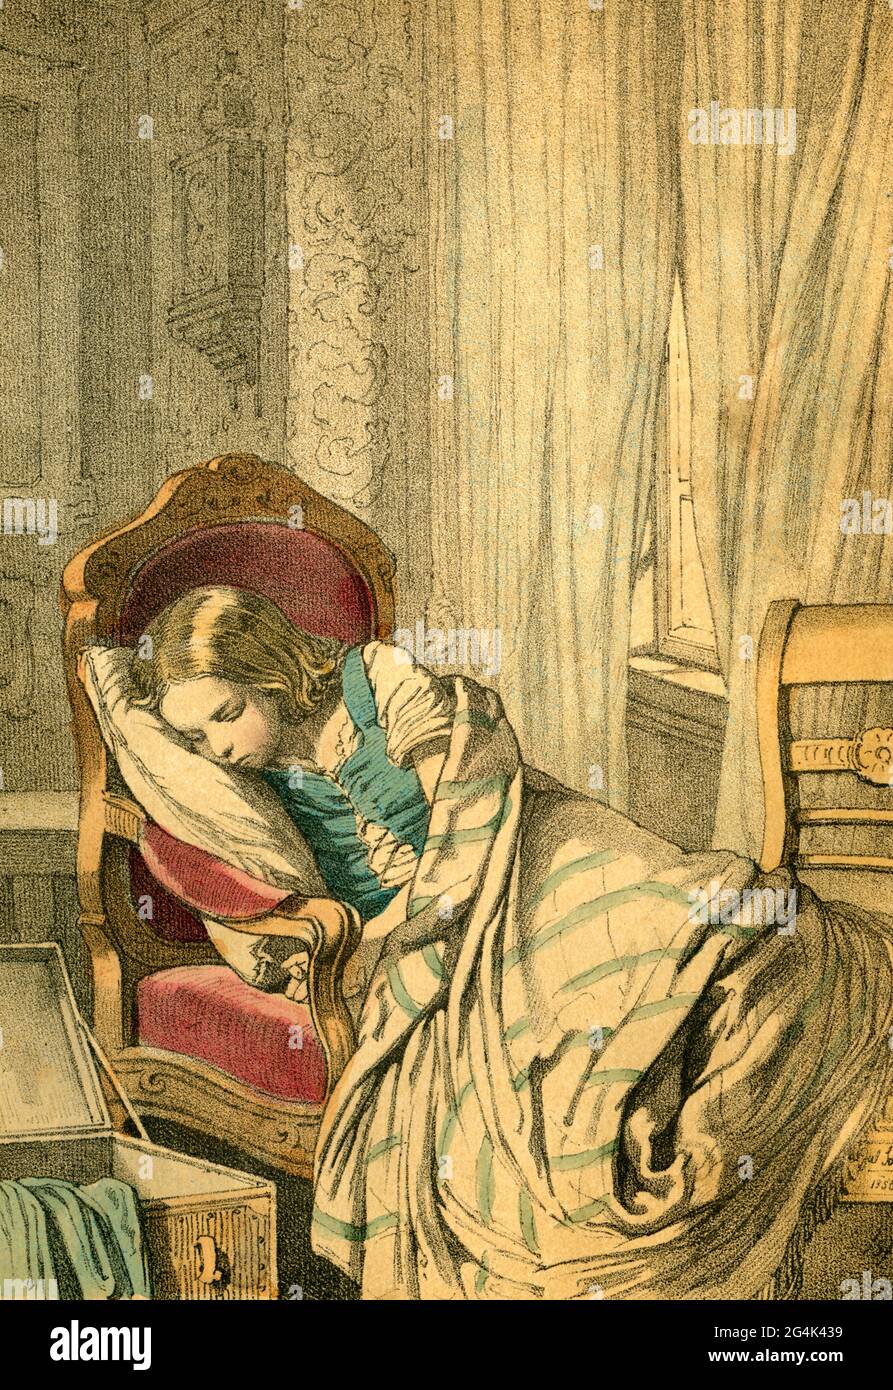 Germany, Saxony, Dresden, sleeping girl, coloured illustration from: 'Die Geschwister' (the siblings), ADDITIONAL-RIGHTS-CLEARANCE-INFO-NOT-AVAILABLE Stock Photo